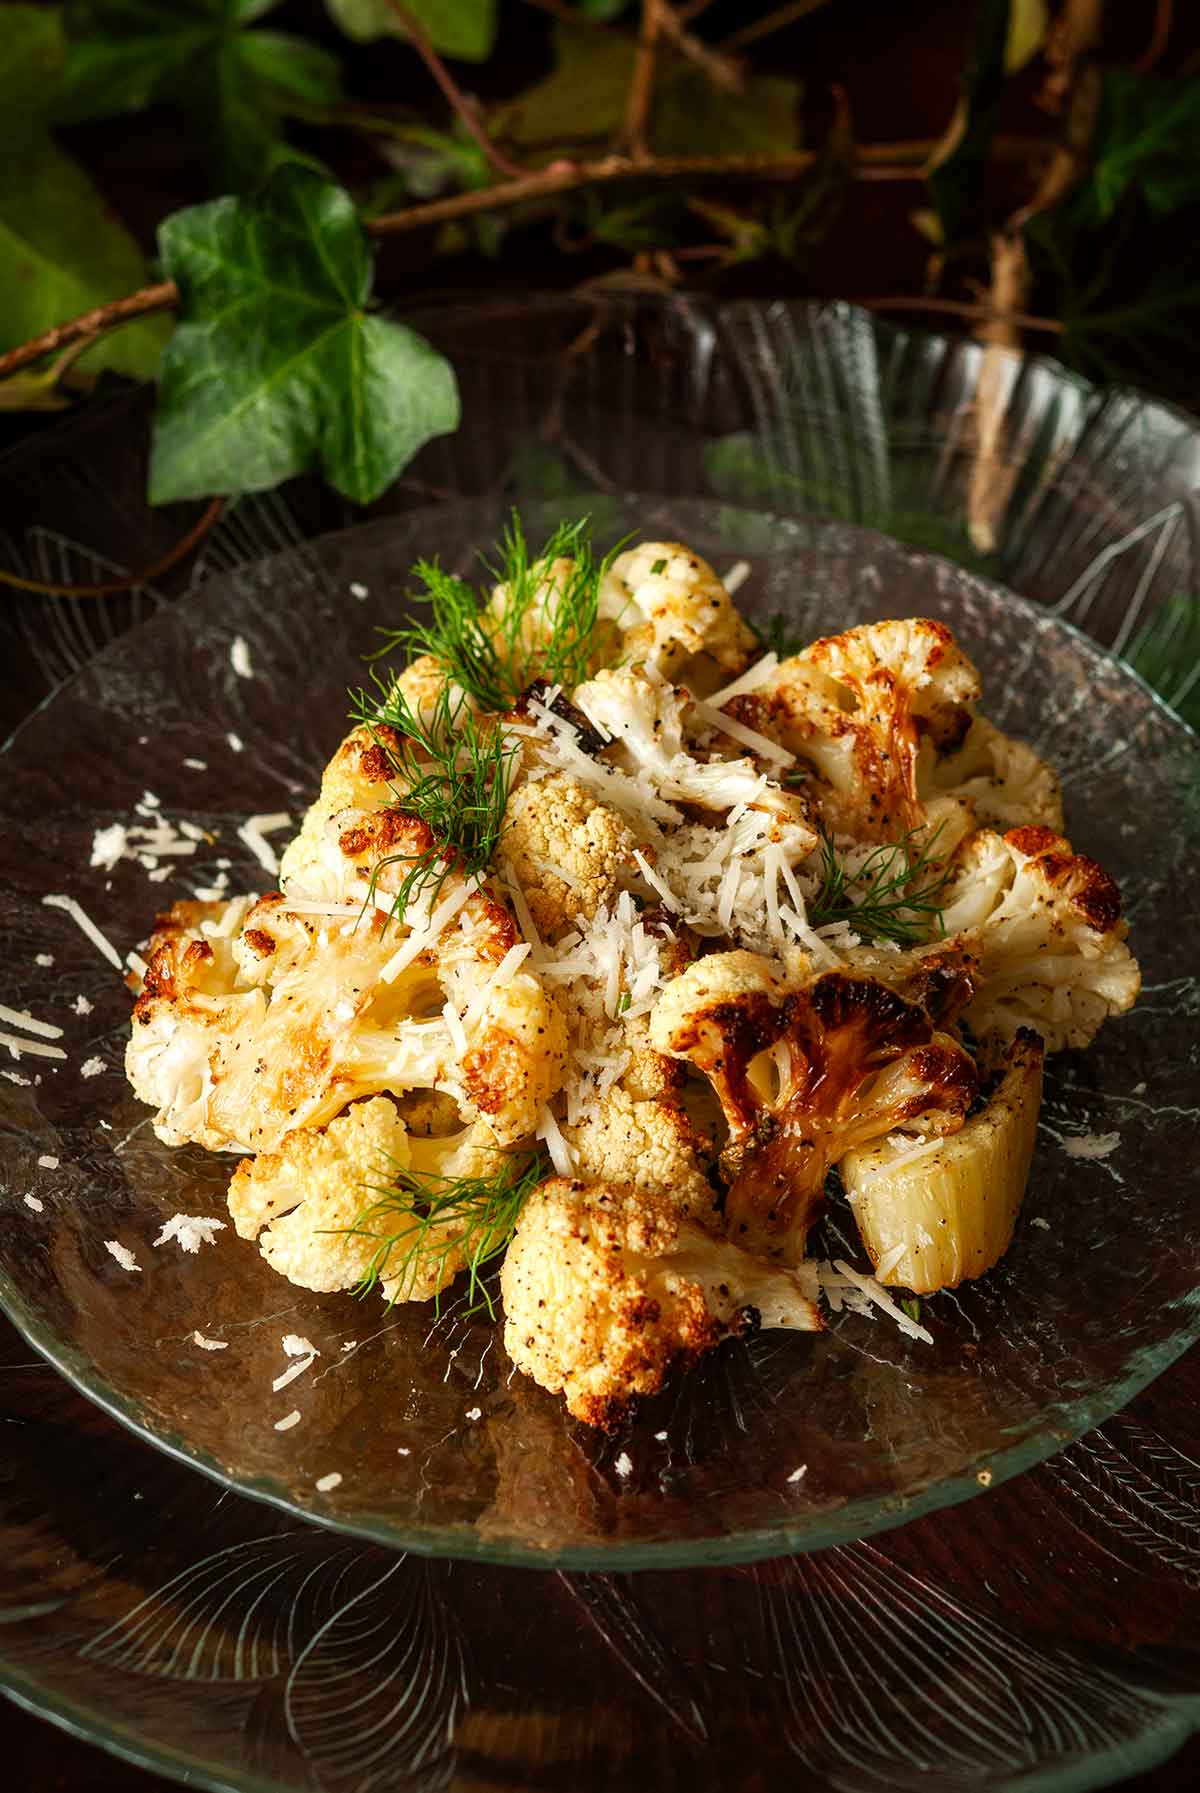 A plate of cauliflower and fennel surrounded by ivy on a table.